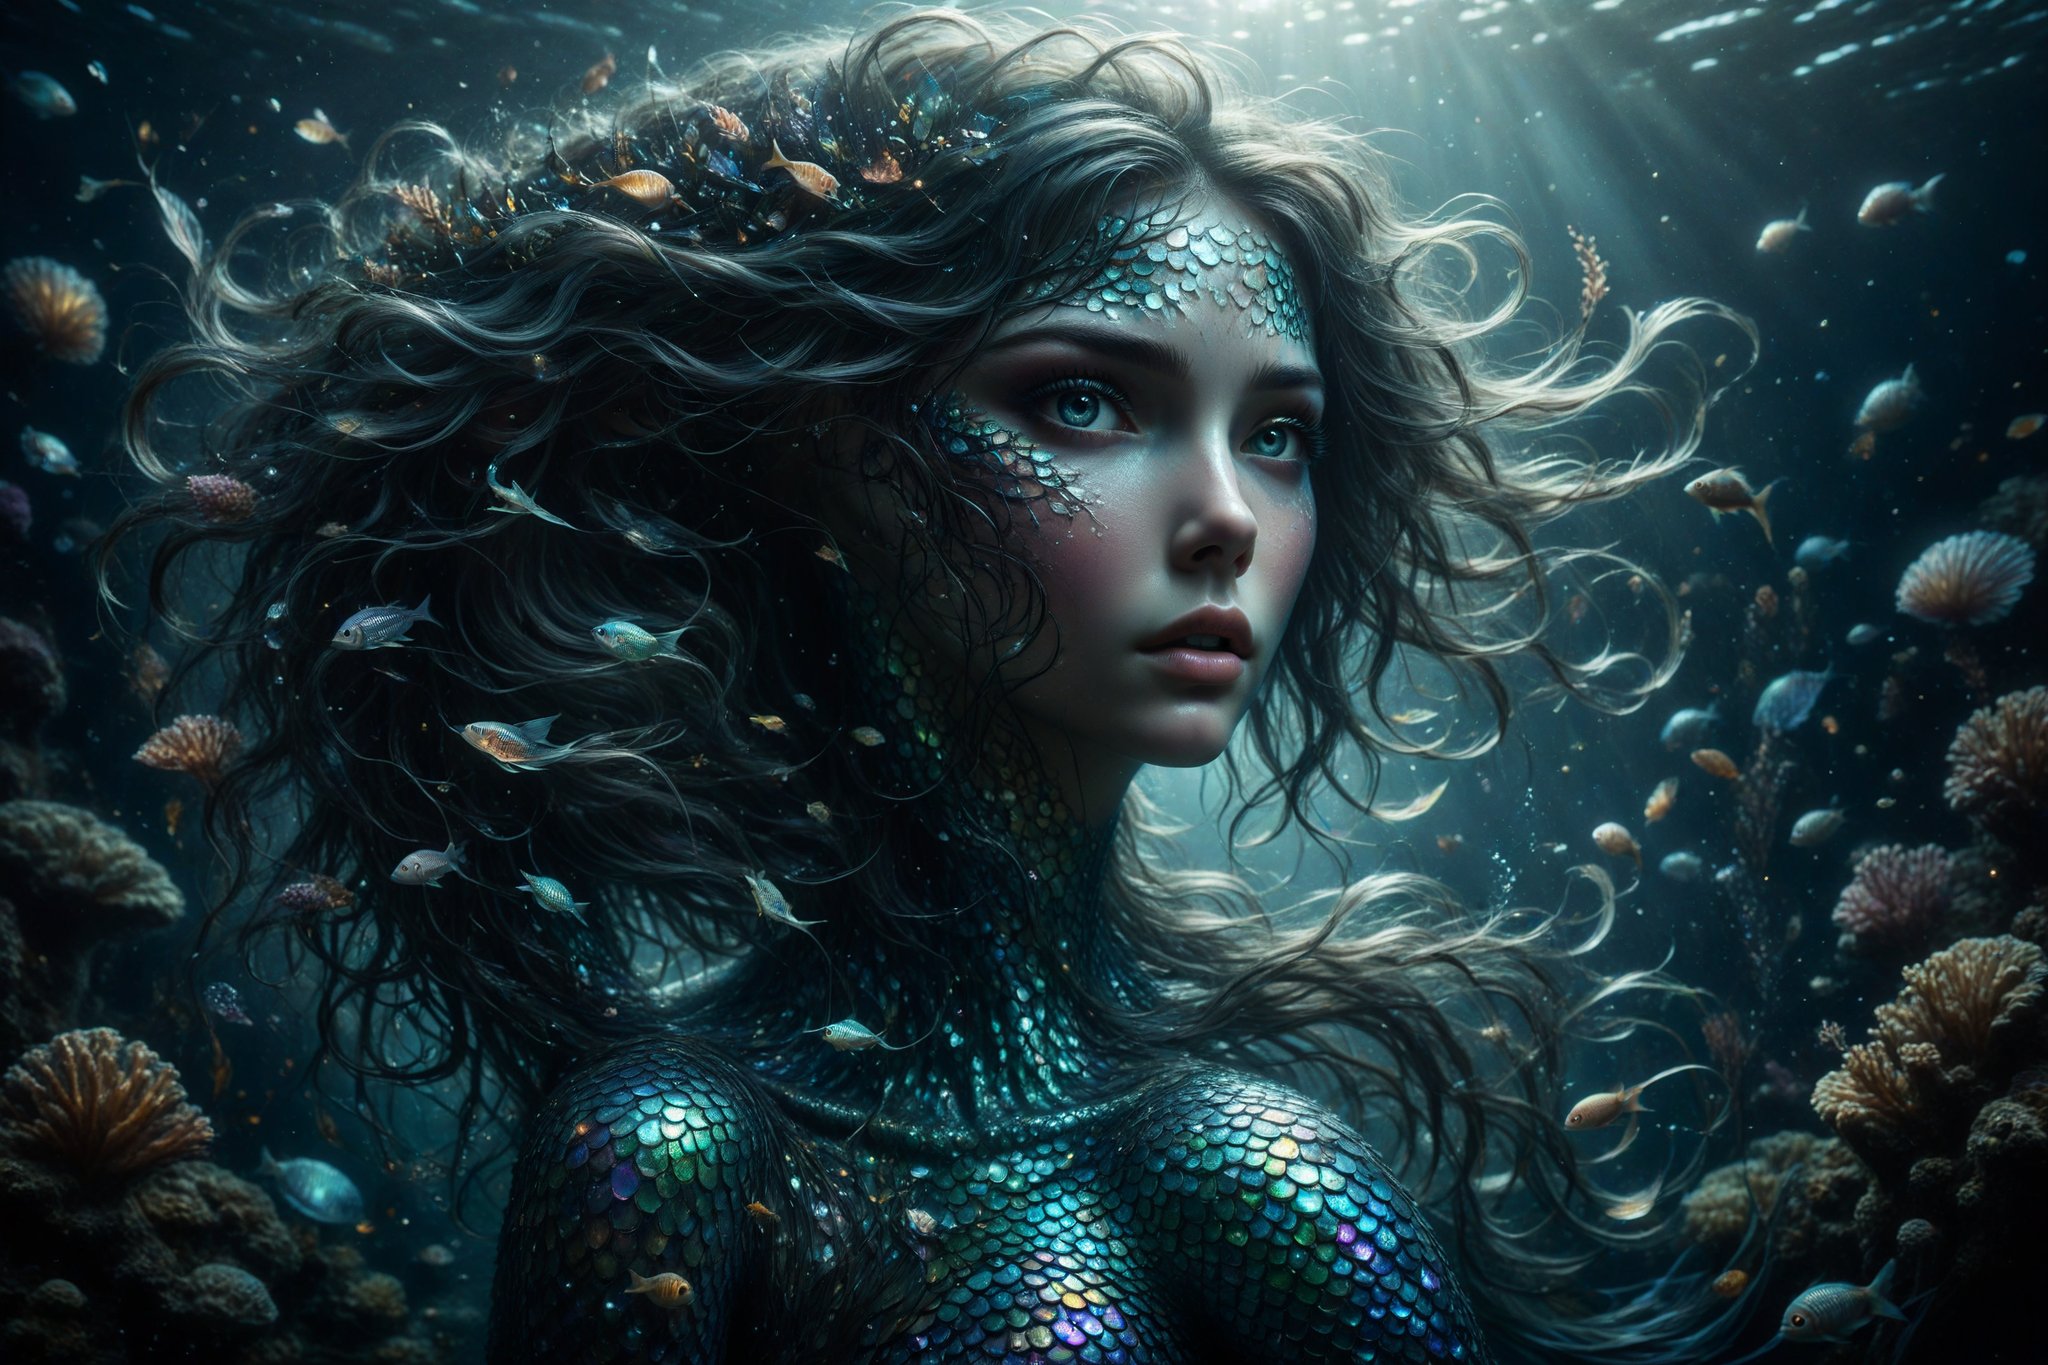 A mermaid with iridescent scales and hair flowing like seaweed, emerging from dark waters where the eyes of marine creatures shine in the depths.